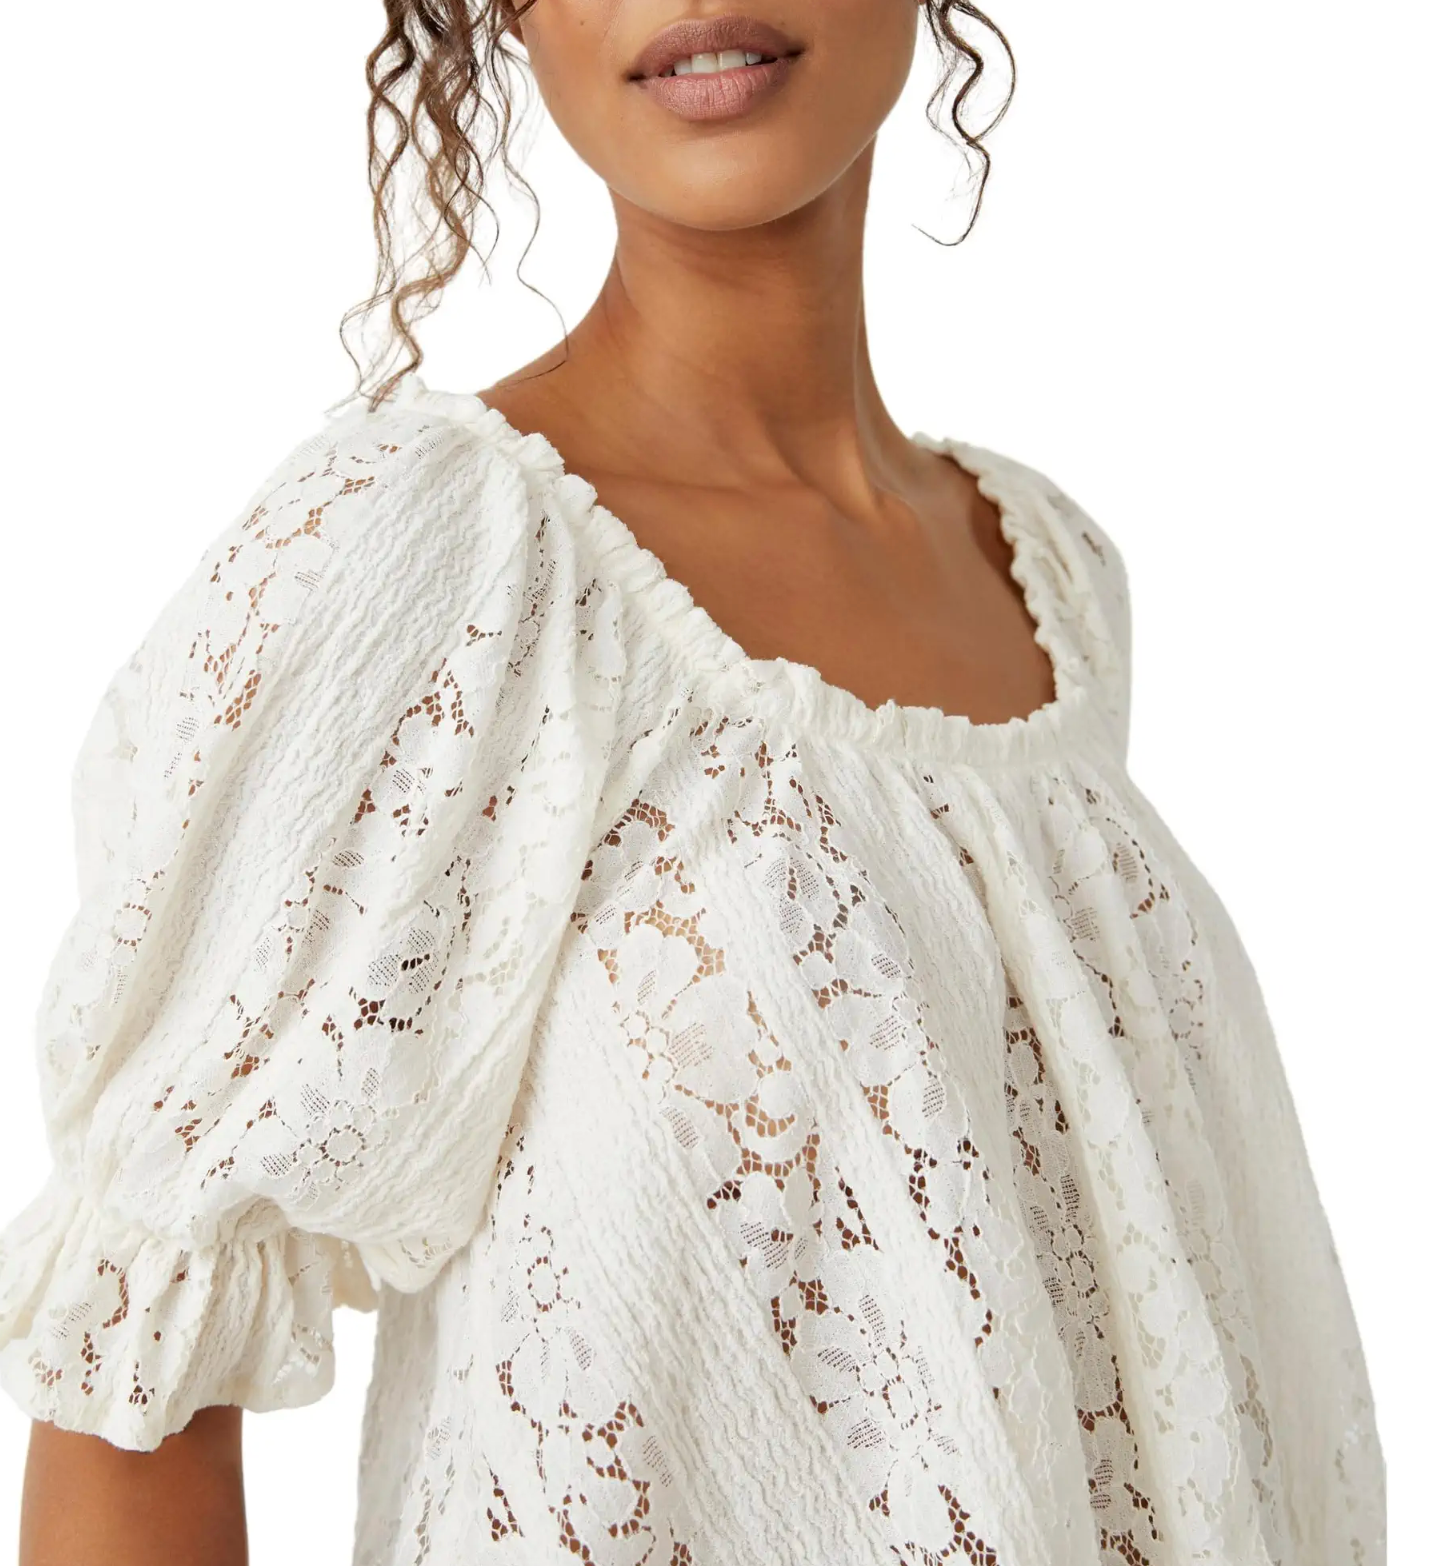 Stacey Lace Top by Free People - Shop Wild Ivy